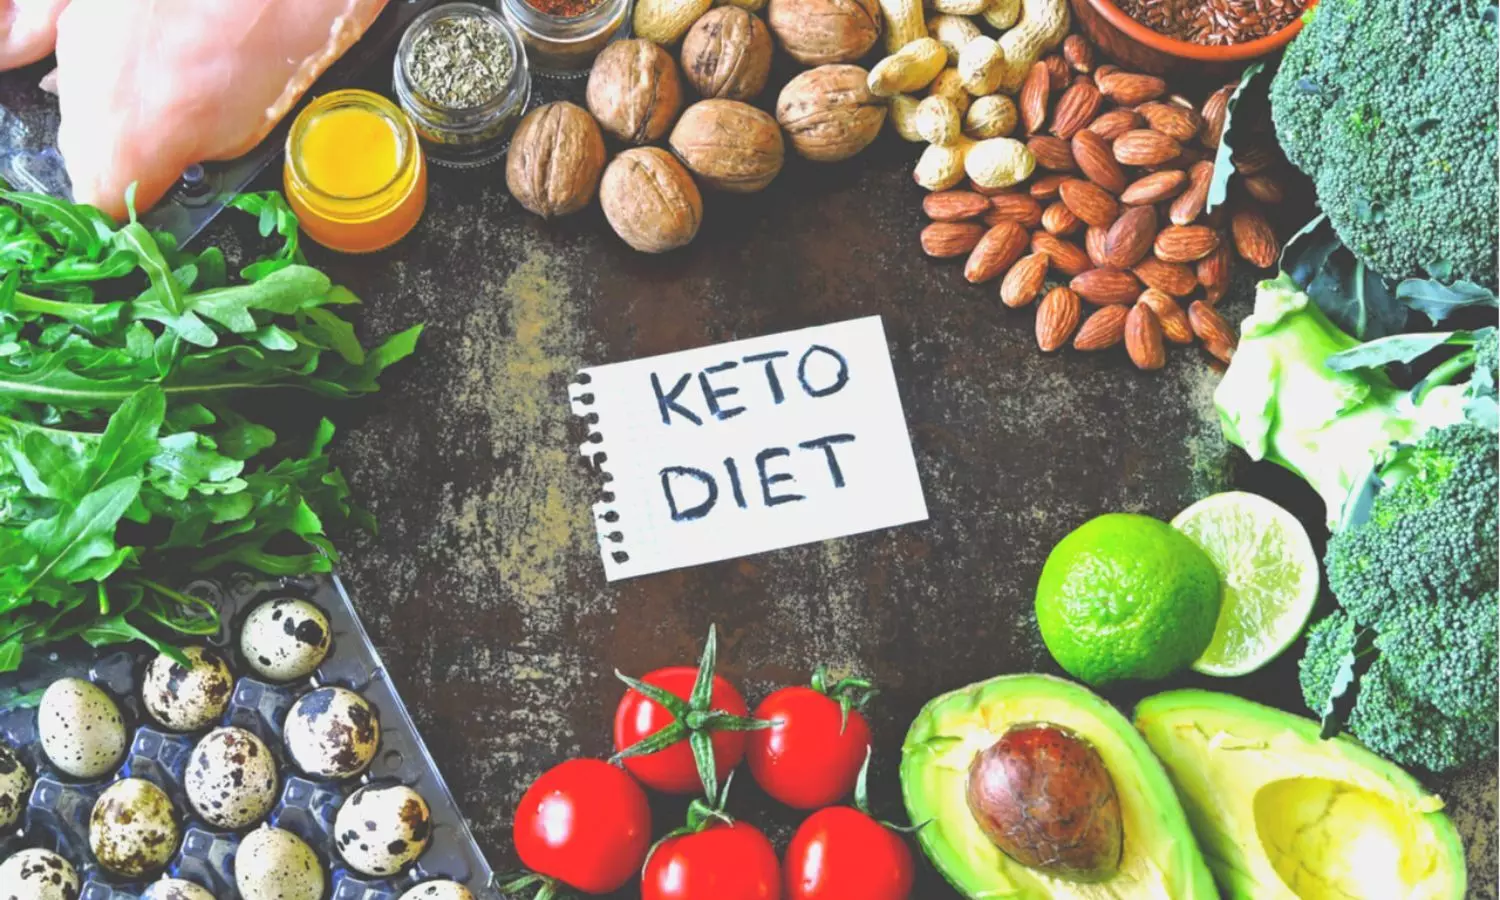 Low-carb ketogenic diets lower CVD risk in obese or overweight people with type 2 diabetes